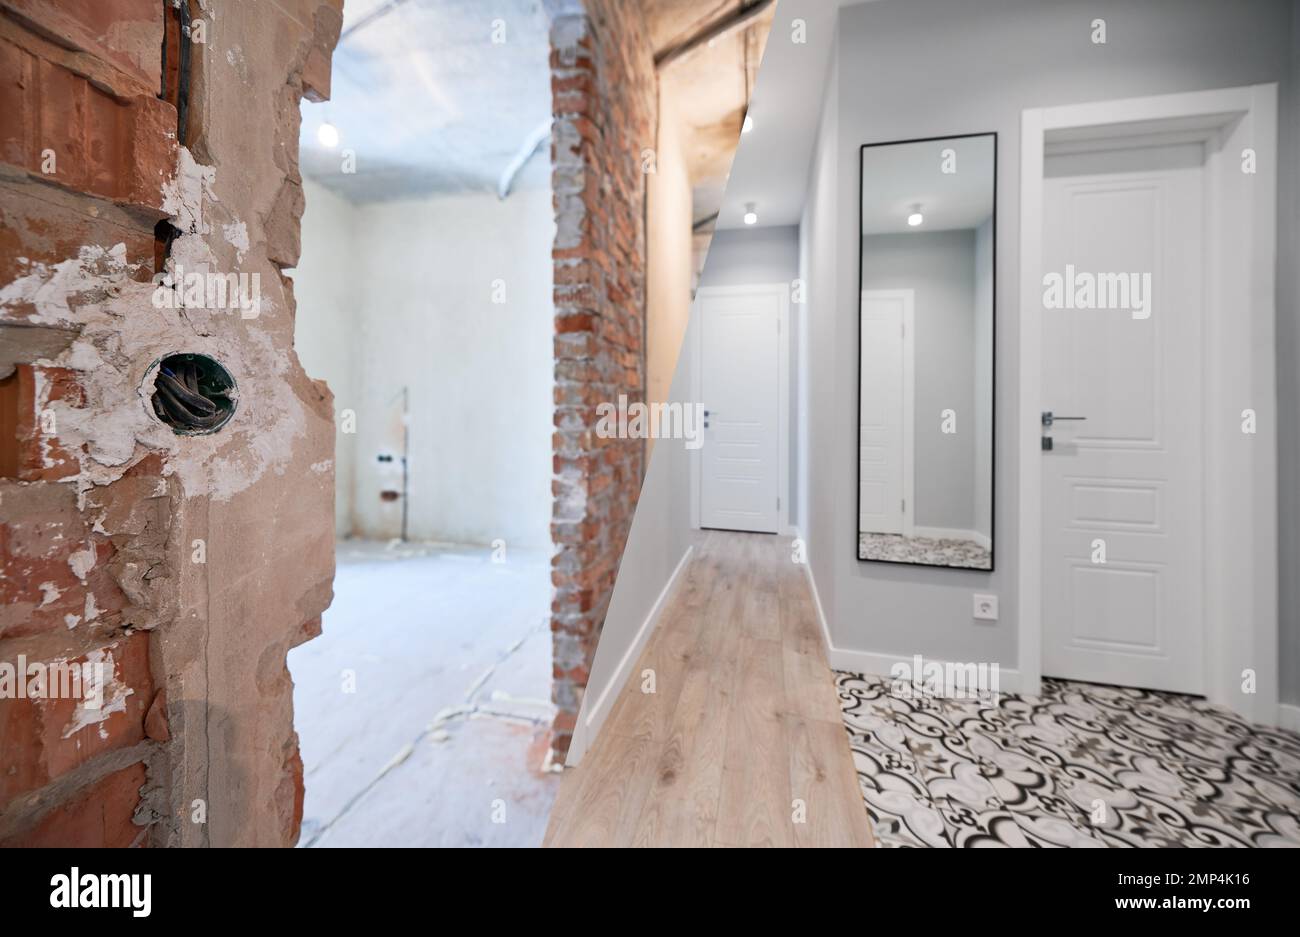 Photo collage of hallway and bedroom before and after refurbishment. Old apartment and new renovated flat with doorway, elegant interior design. Focus on the switch. Stock Photo